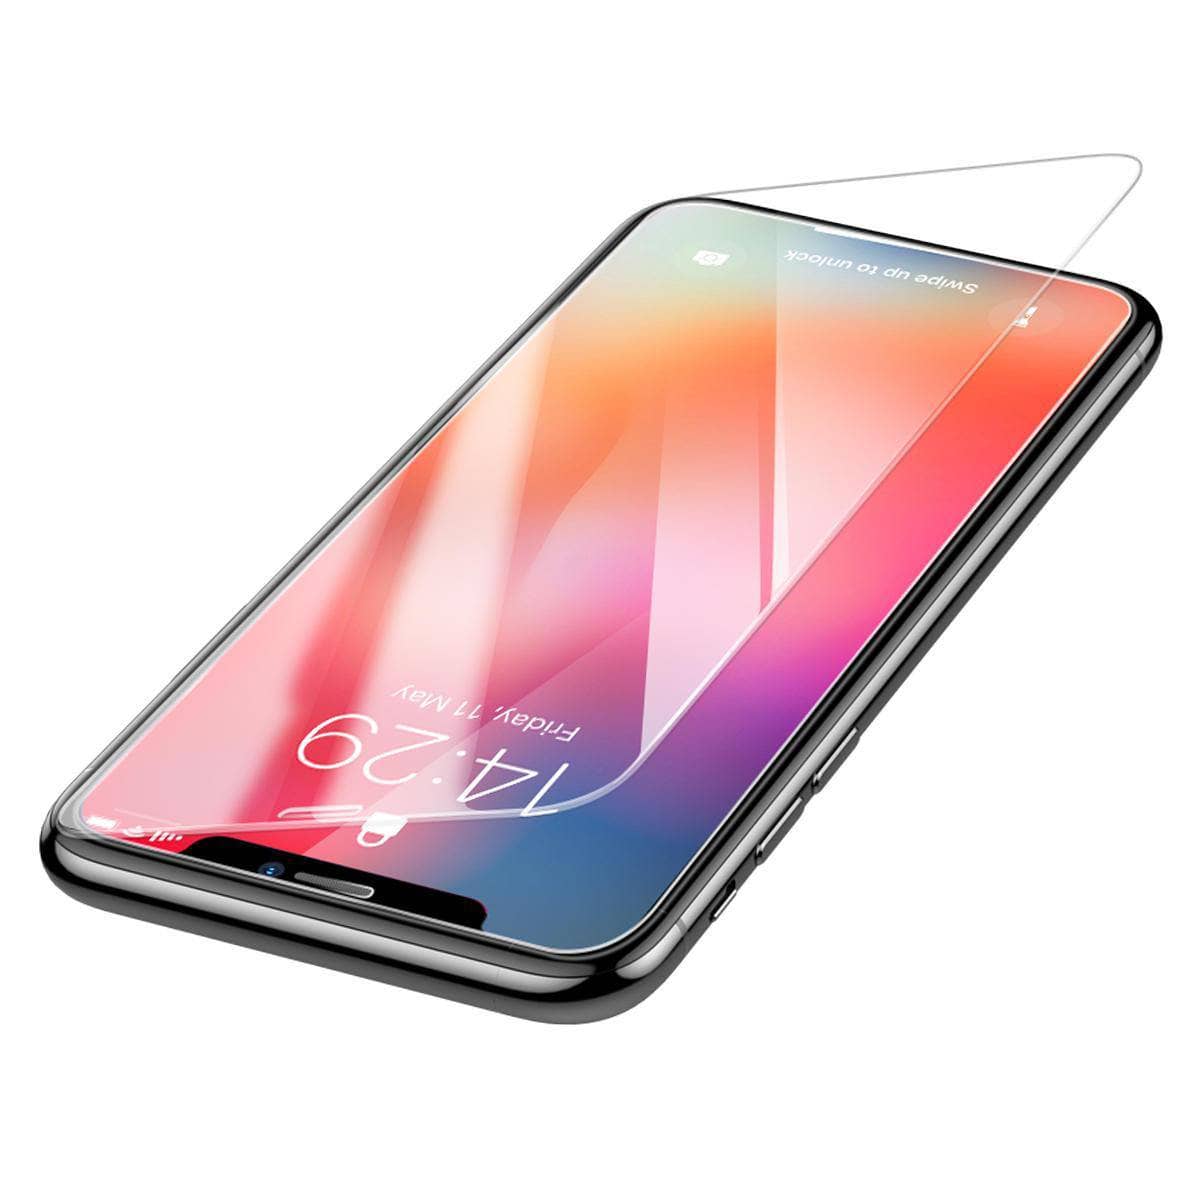 Baseus Tempered Glass - Clear for iPhone 11/XR 6.1 inch Screen Protector 9H Hardness-Screen Protector-Baseus-www.PhoneGuy.com.au